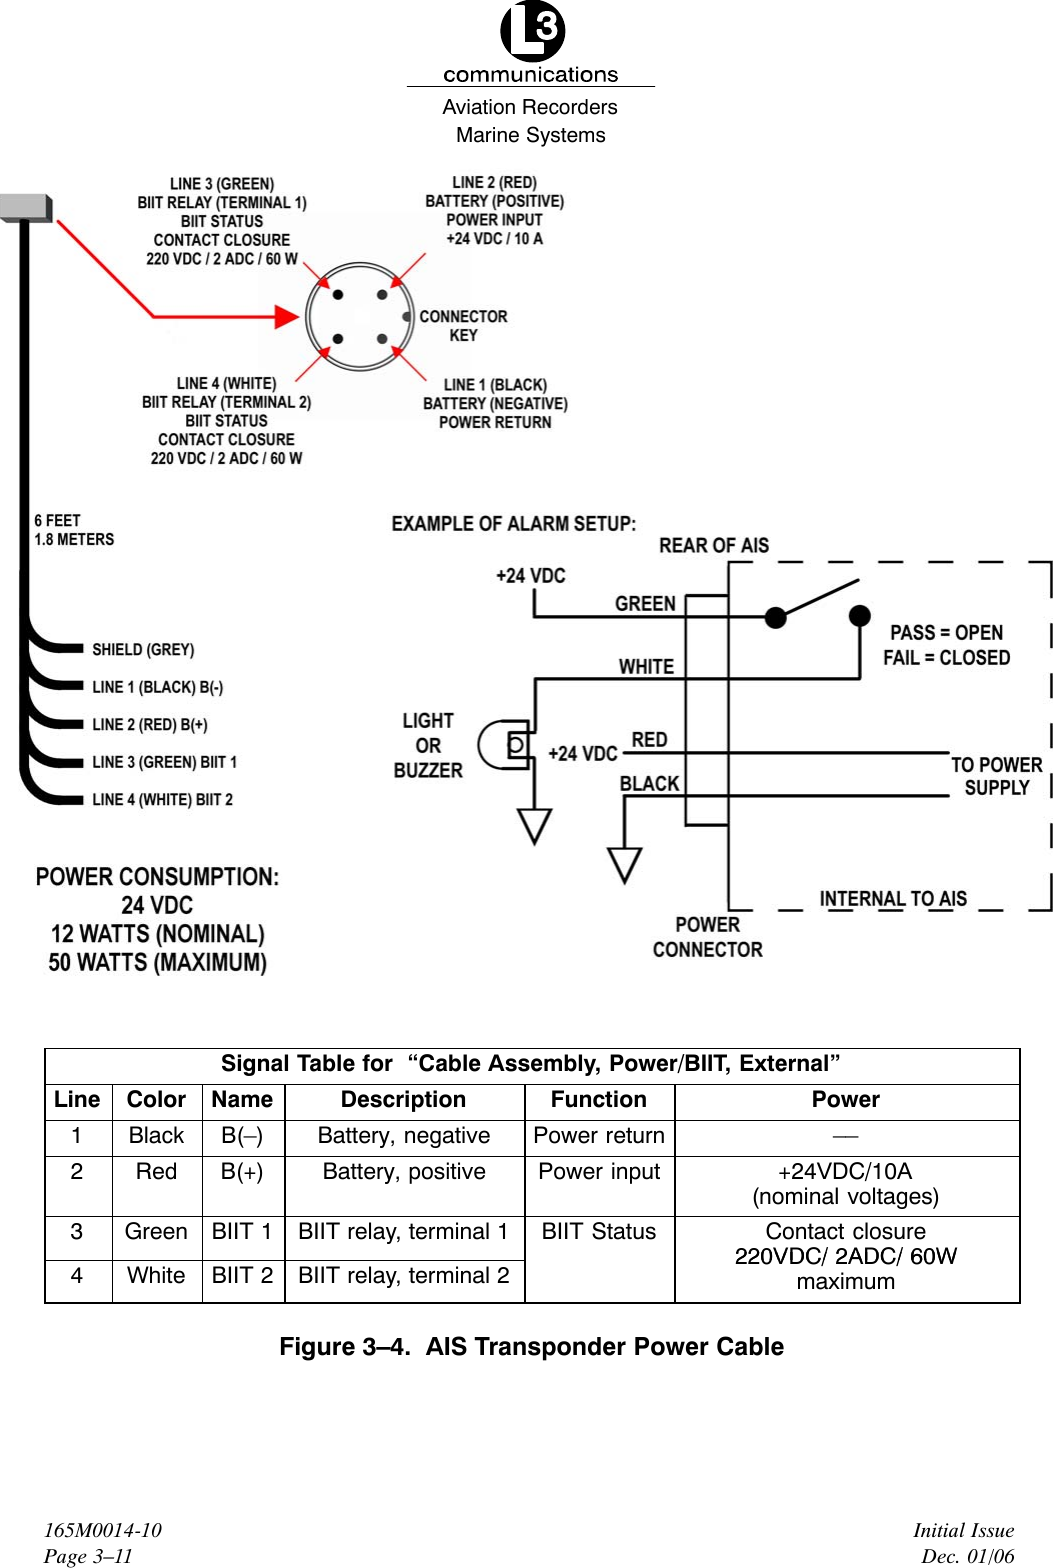 Marine SystemsAviation RecordersInitial IssueDec. 01/06165M0014-10Page 3–11Signal Table for  “Cable Assembly, Power/BIIT, External”Line Color Name Description Function Power1 Black B(–) Battery, negative Power return ––2 Red B(+) Battery, positive Power input +24VDC/10A(nominal voltages)3 Green BIIT 1 BIIT relay, terminal 1 BIIT Status Contact closure220VDC/ 2ADC/ 60W4 White BIIT 2 BIIT relay, terminal 2220VDC/ 2ADC/ 60WmaximumFigure 3–4.  AIS Transponder Power Cable